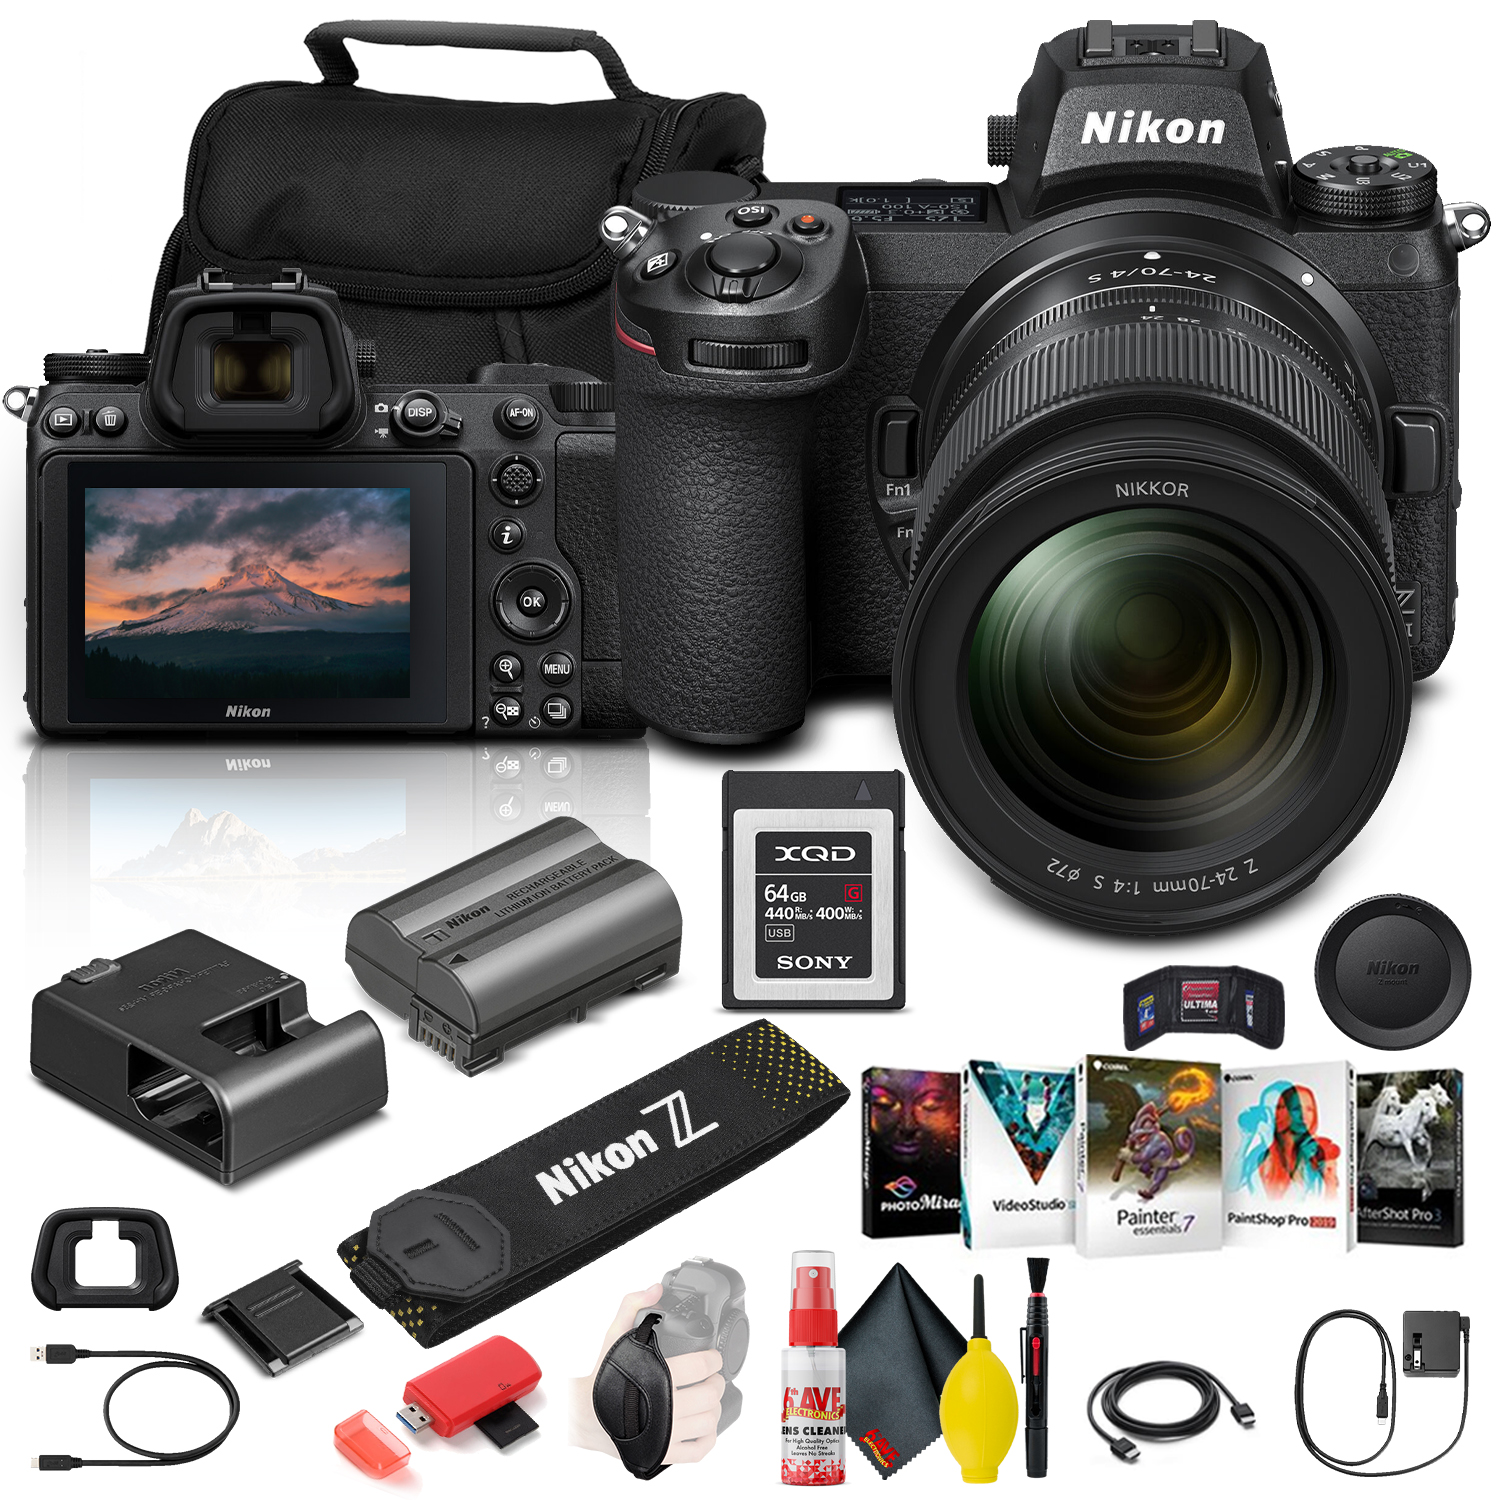 Nikon Z 6II Mirrorless Digital Camera 24.5MP with 24-70mm f/4 Lens (1663) + 64GB XQD Card + Corel Photo Software + Case + HDMI Cable + Card Reader + Cleaning Set + More - International Model - image 1 of 7